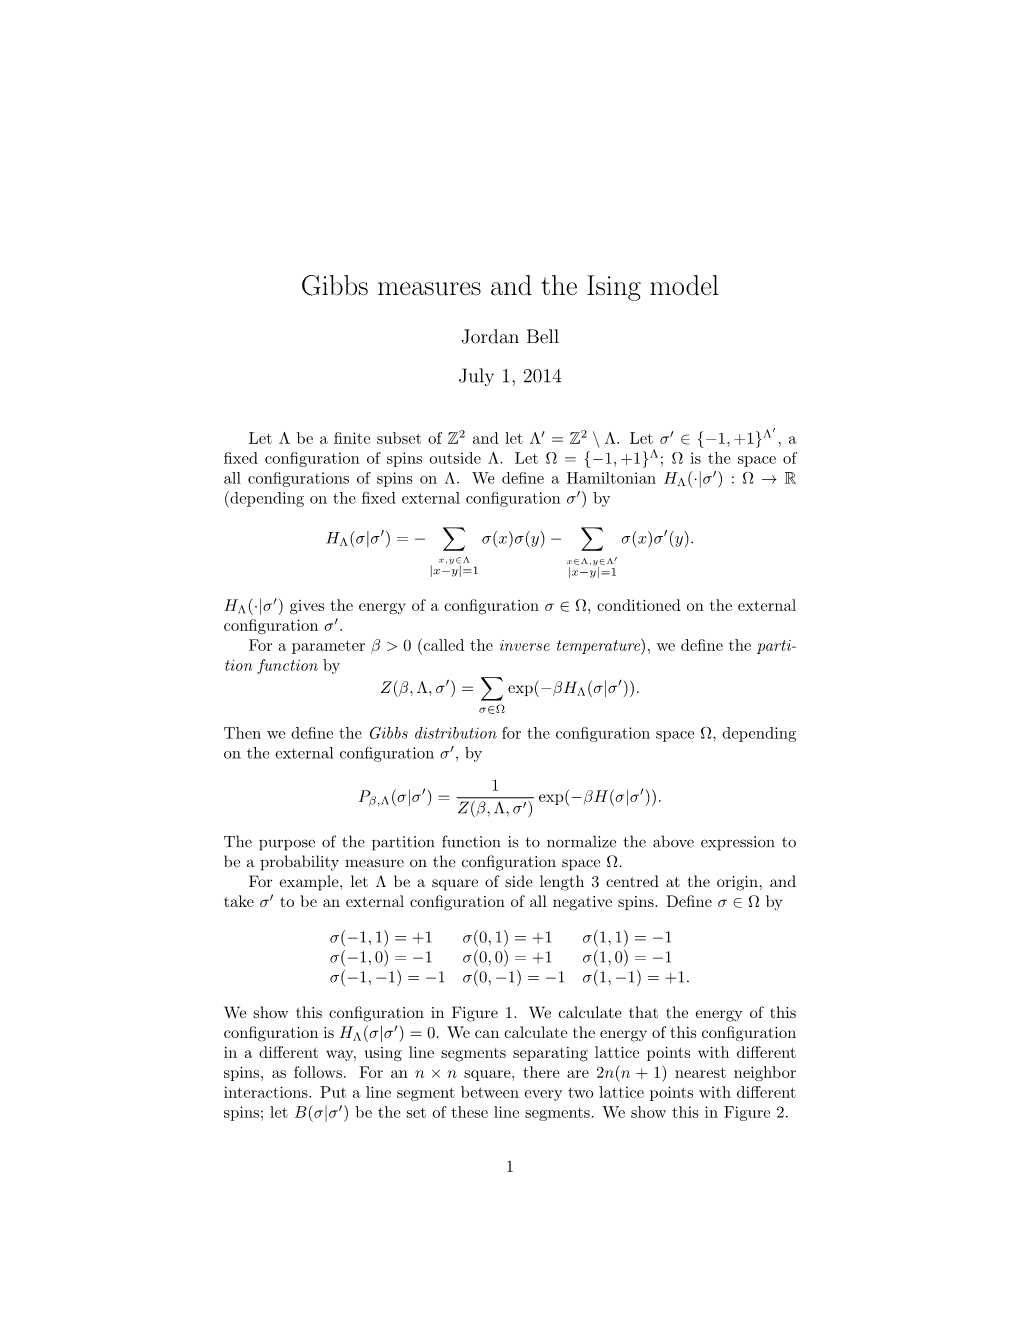 Gibbs Measures and the Ising Model